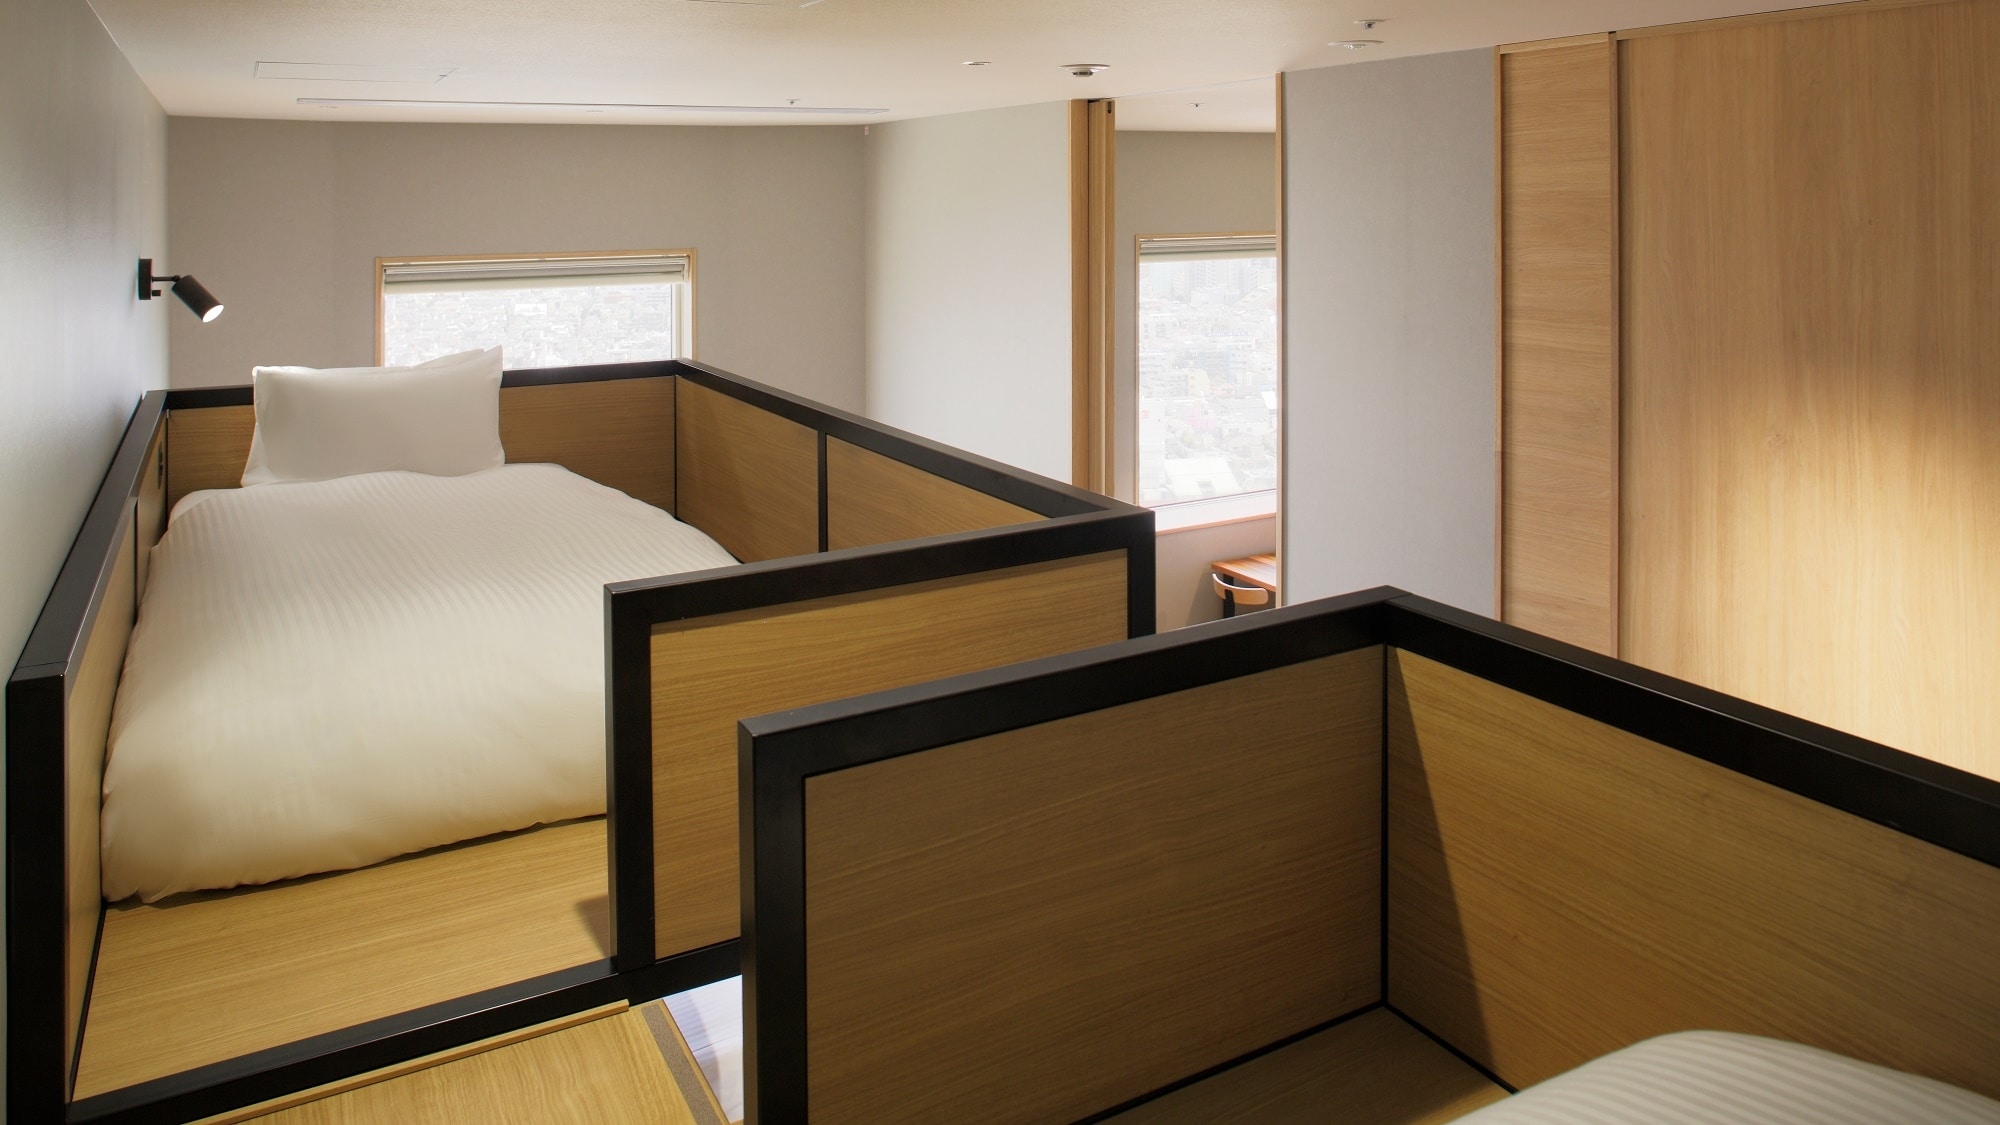 ◆Aoi Bank Bedroom｜A bunk bed that will excite both adults and children.